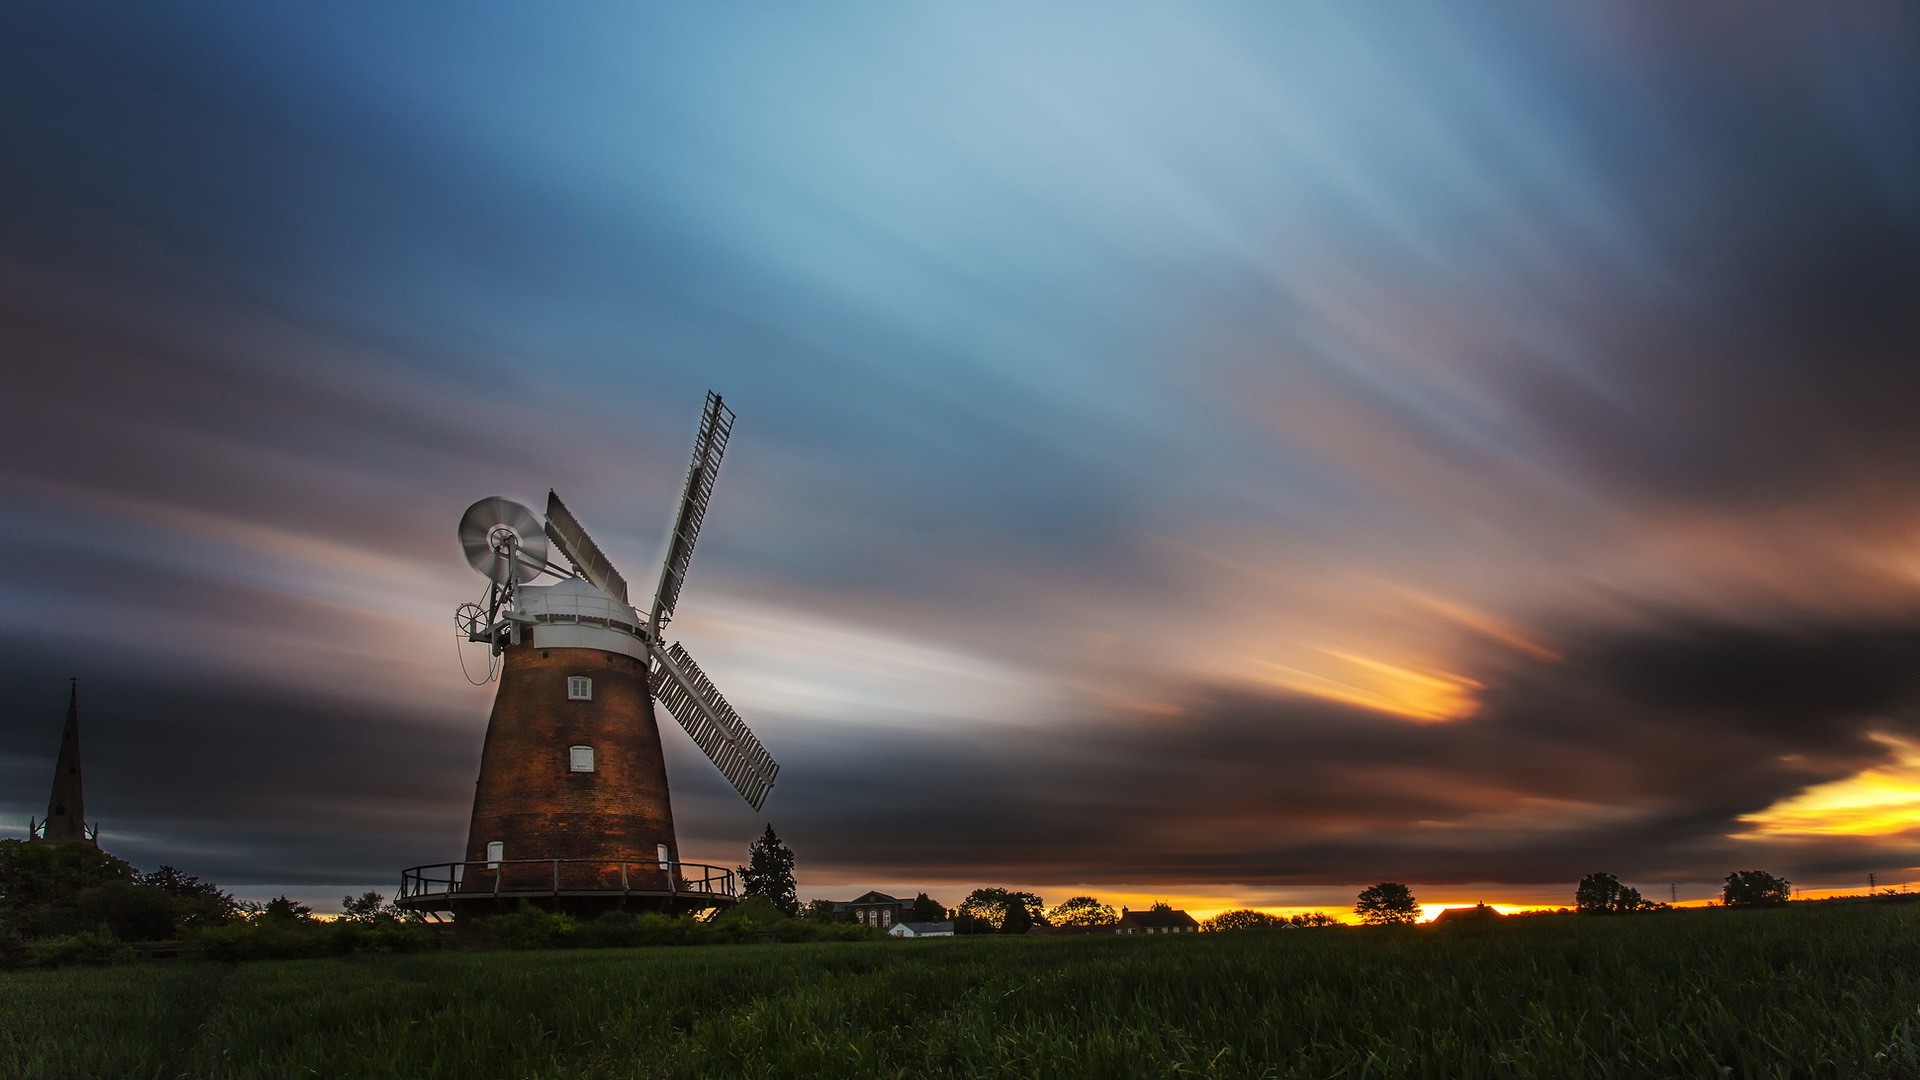 nature, Landscape, Architecture, Old Building, Trees, Windmills, Sunlight, Clouds, Field, Long Exposure, England Wallpaper